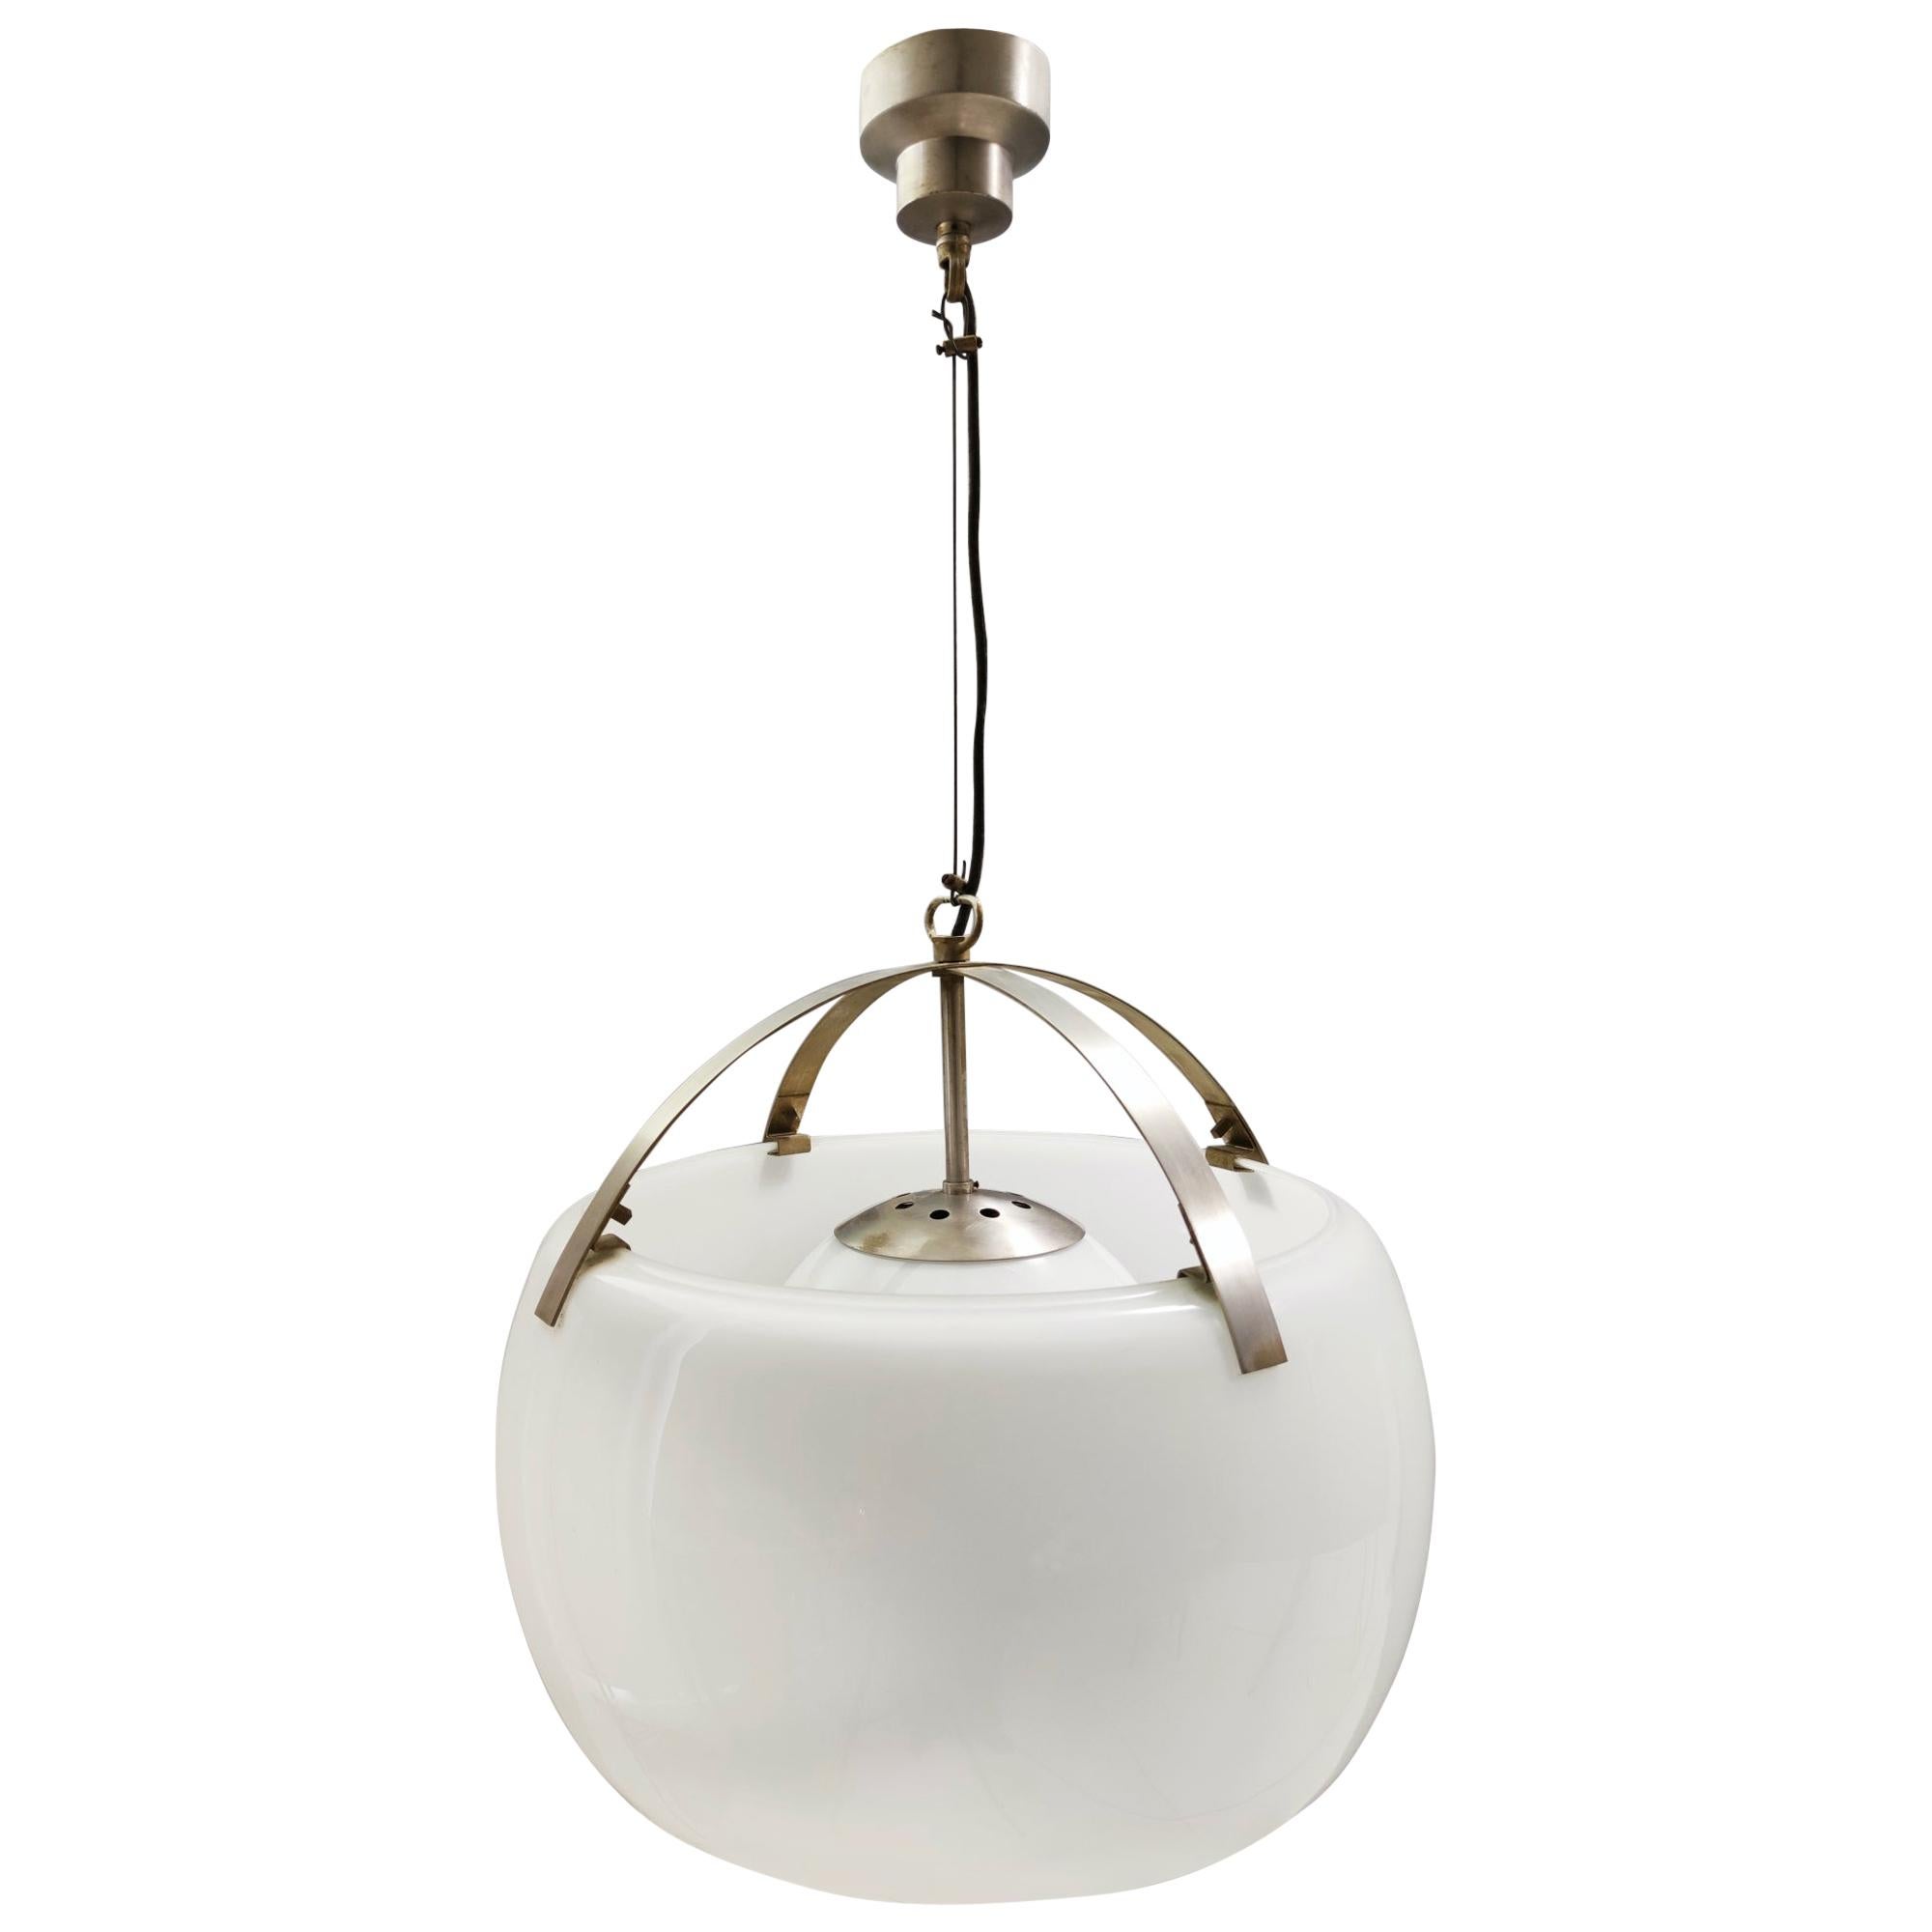 Large White Hanging Lamp "Omega" by Vico Magistretti for Artemide, 1962 For Sale